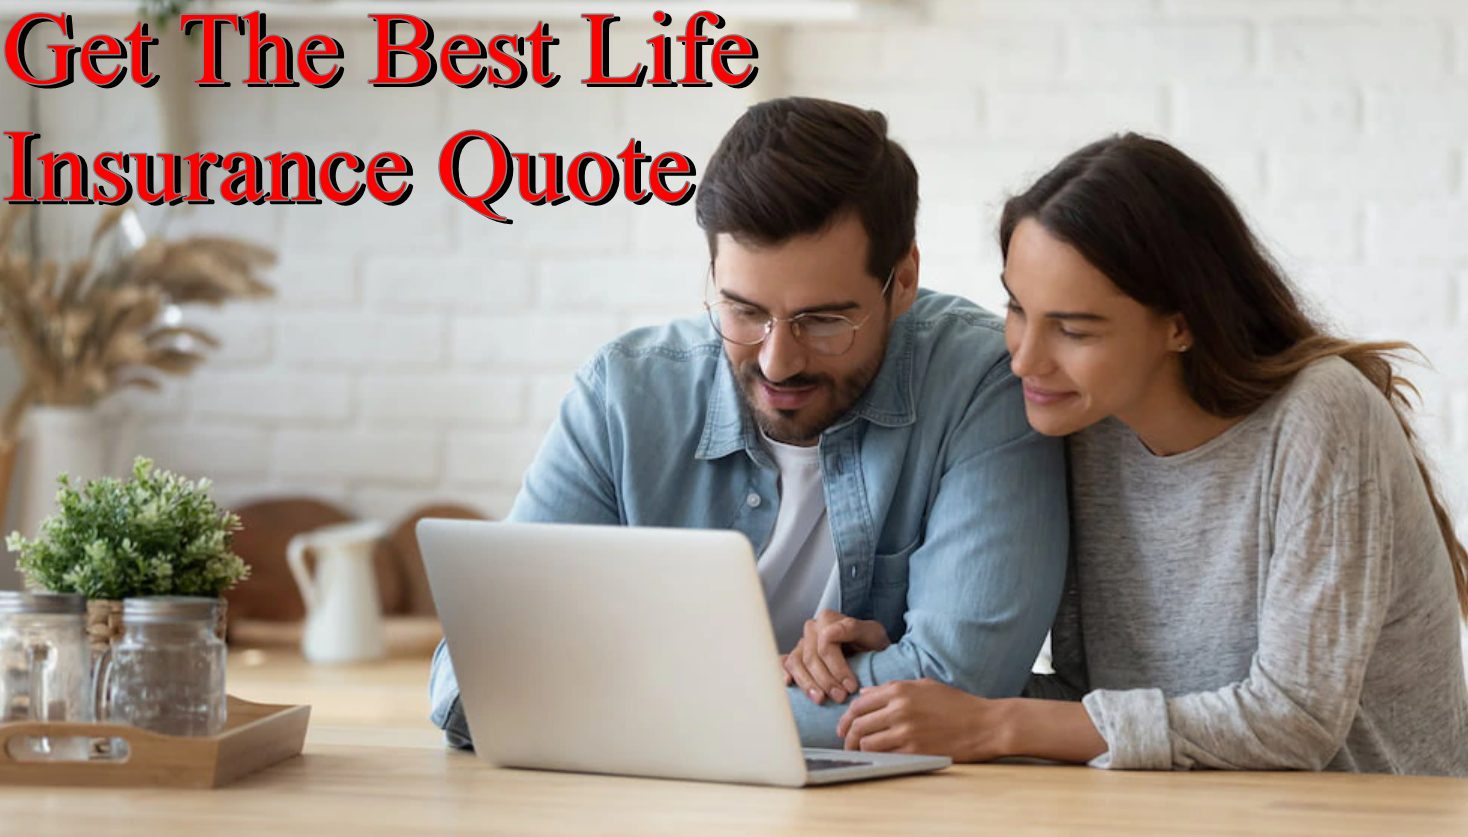 Life Insurance Quote - Protecting Your Future, Securing Peace of Mind